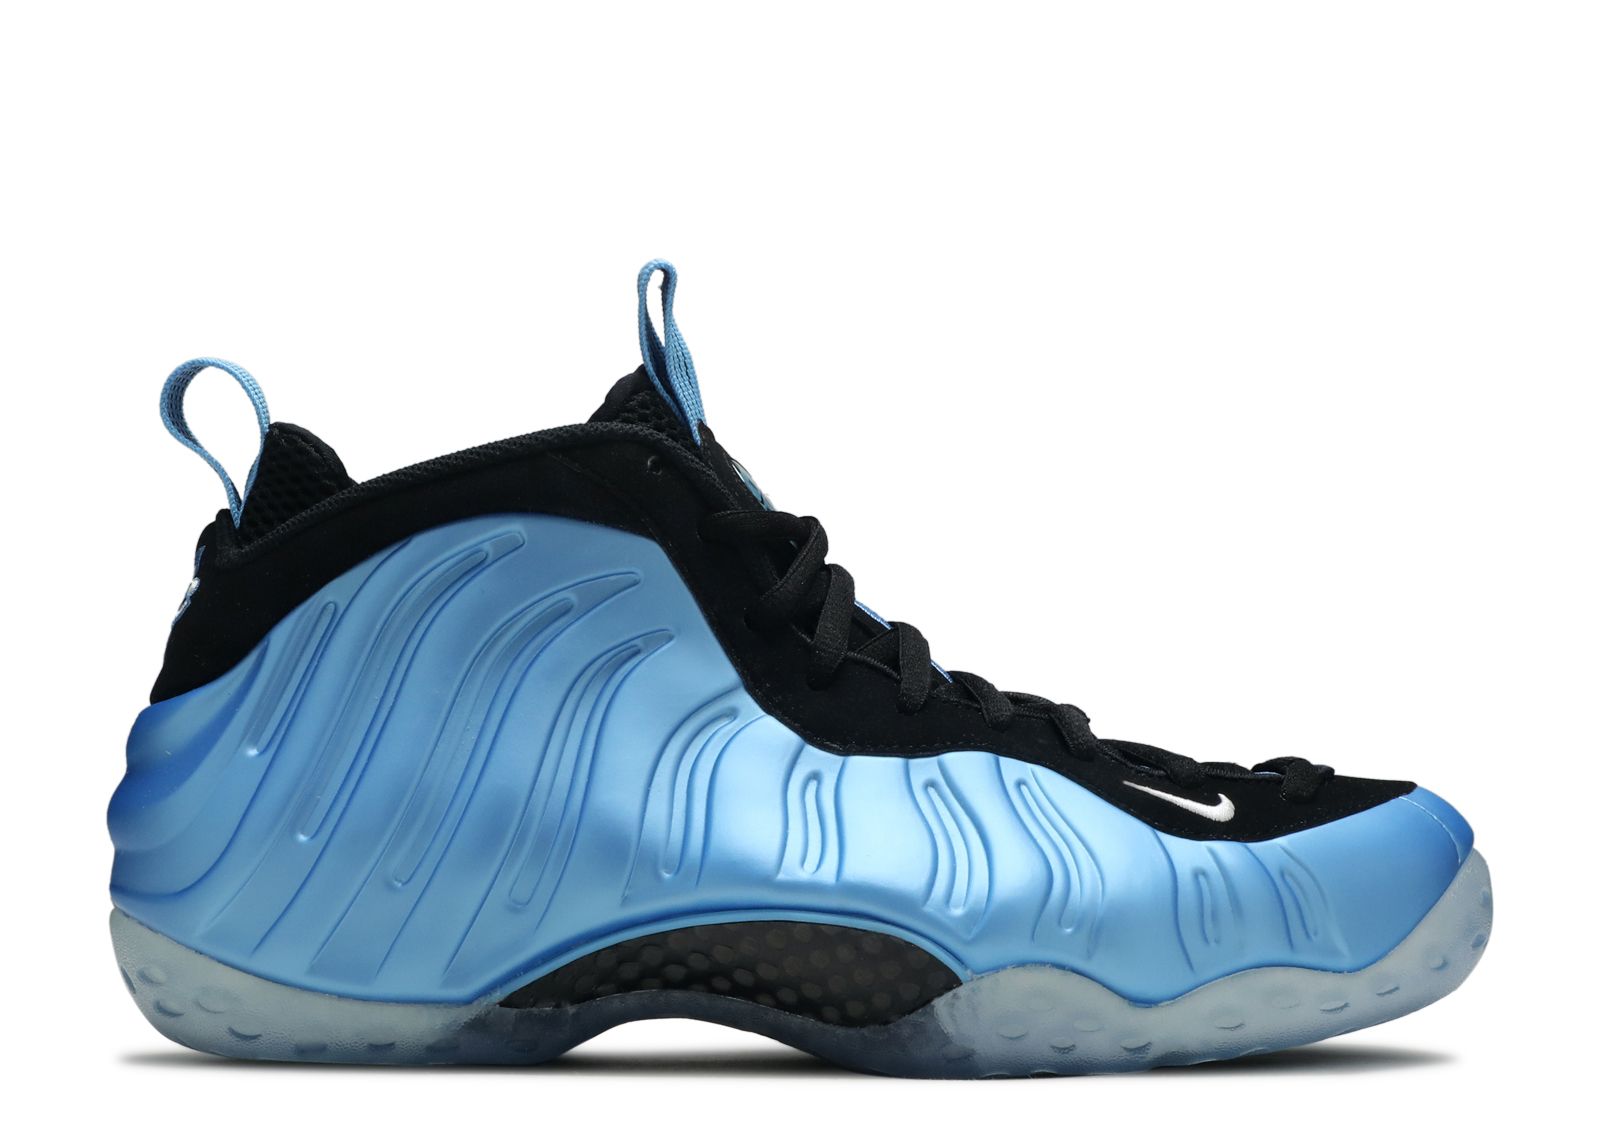 Who's Looking Forward To The Nike Air Foamposite One